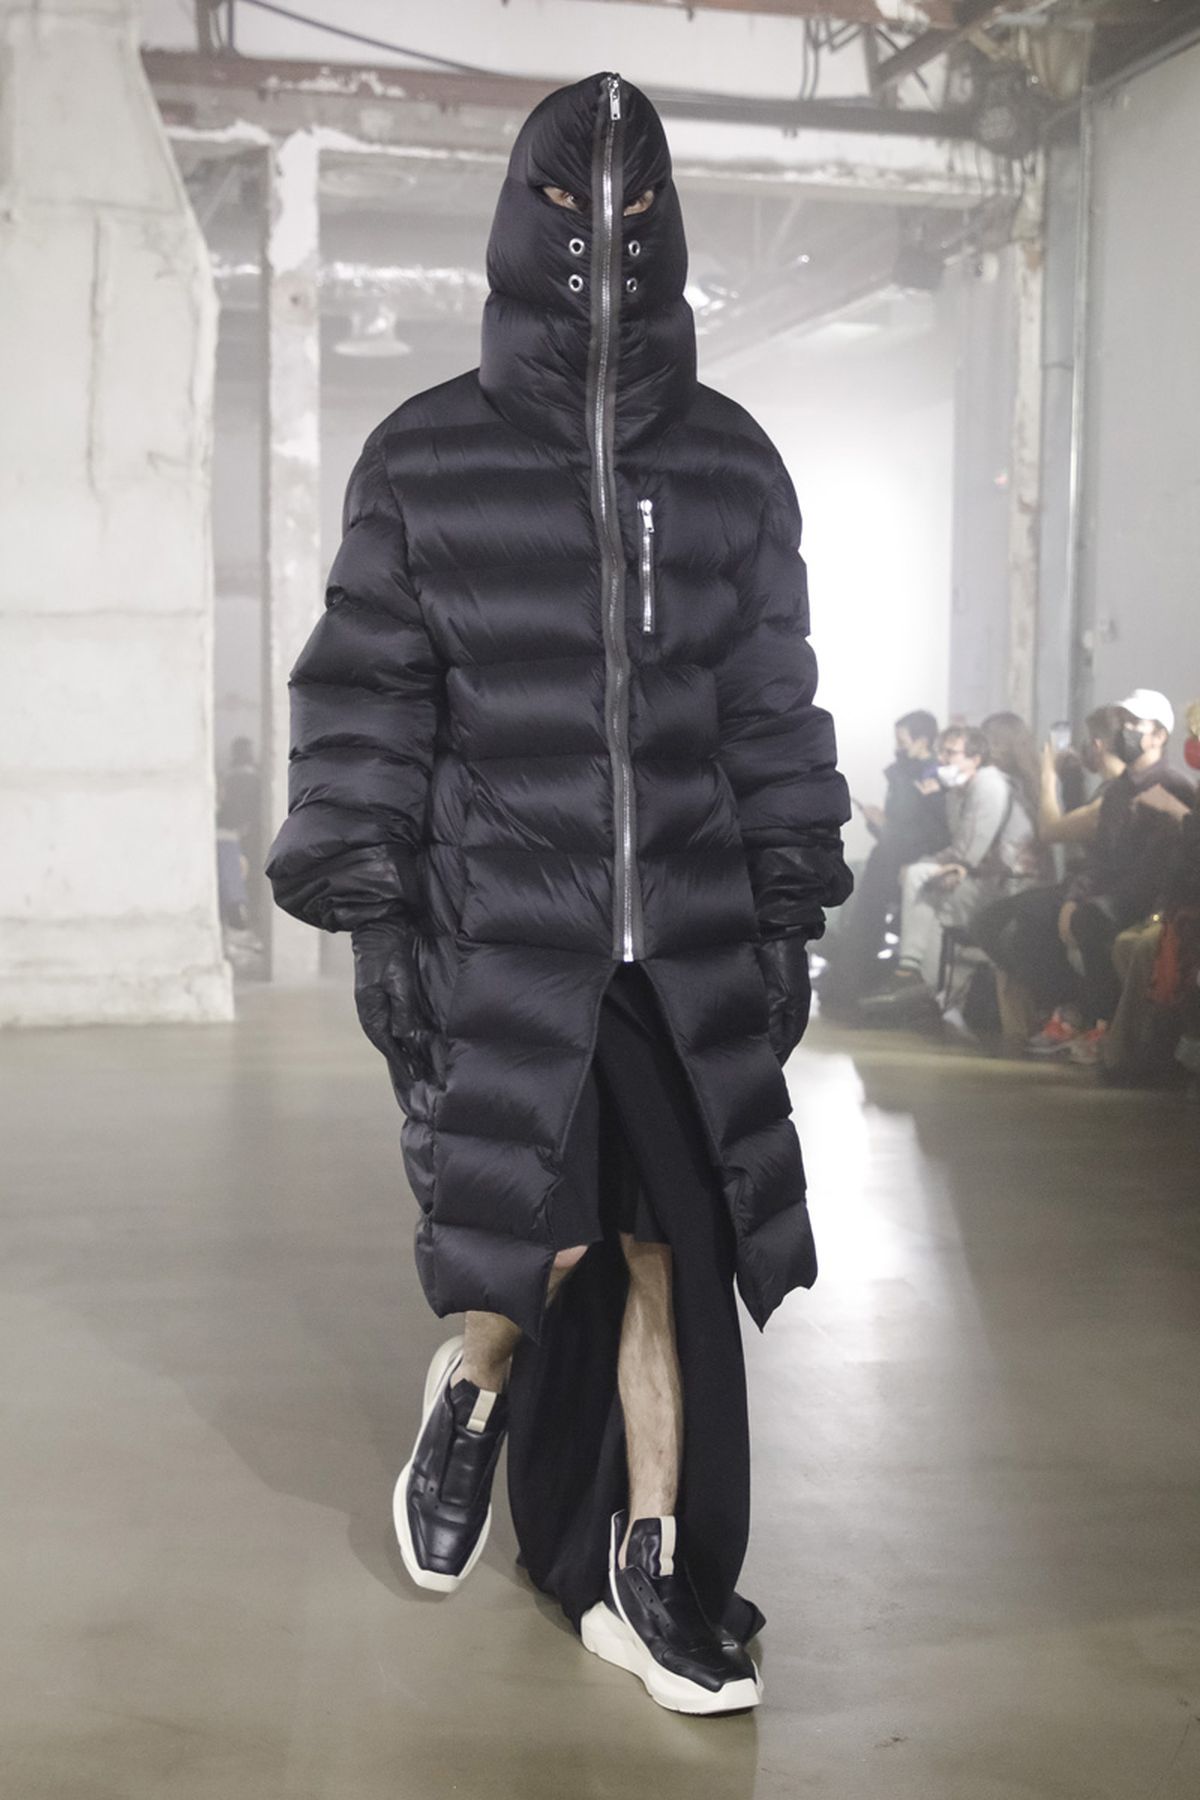 Rick Owens Fall/Winter 2022 Collection: Lightbulb Hats & Leather